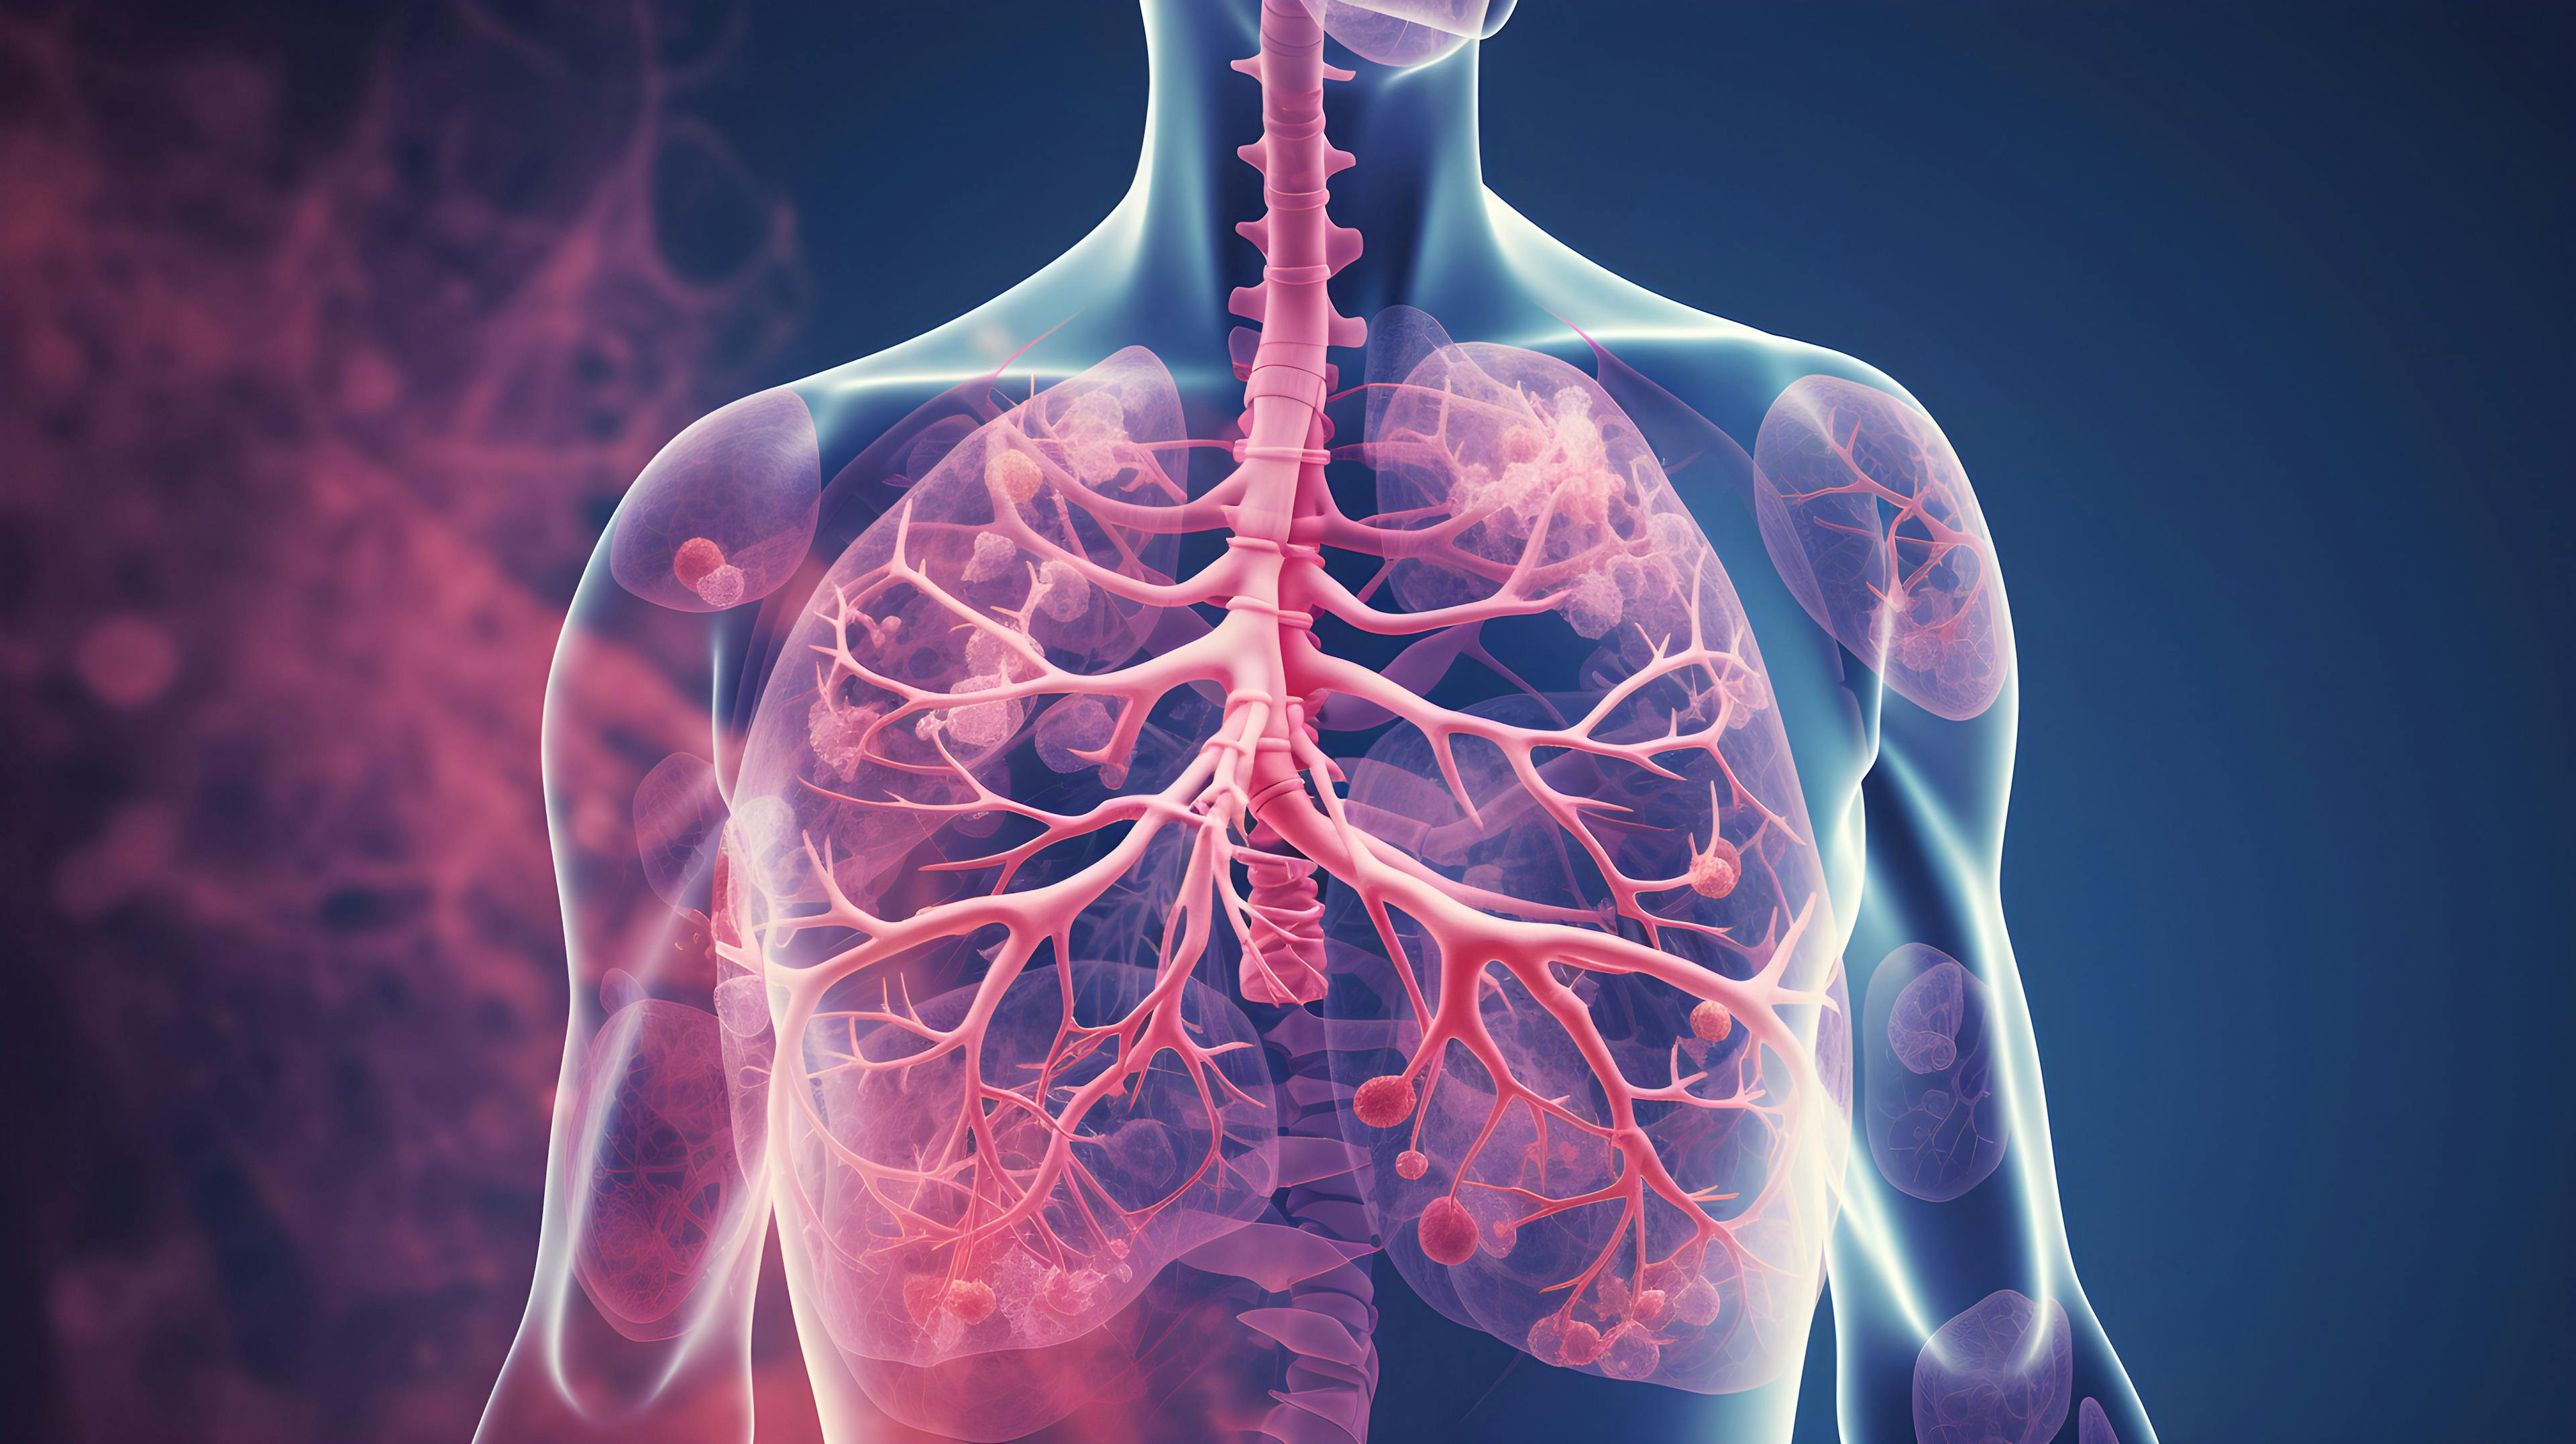 COPD Exacerbations Reduced Substantially With Dupilumab, Phase 3 Data Shows